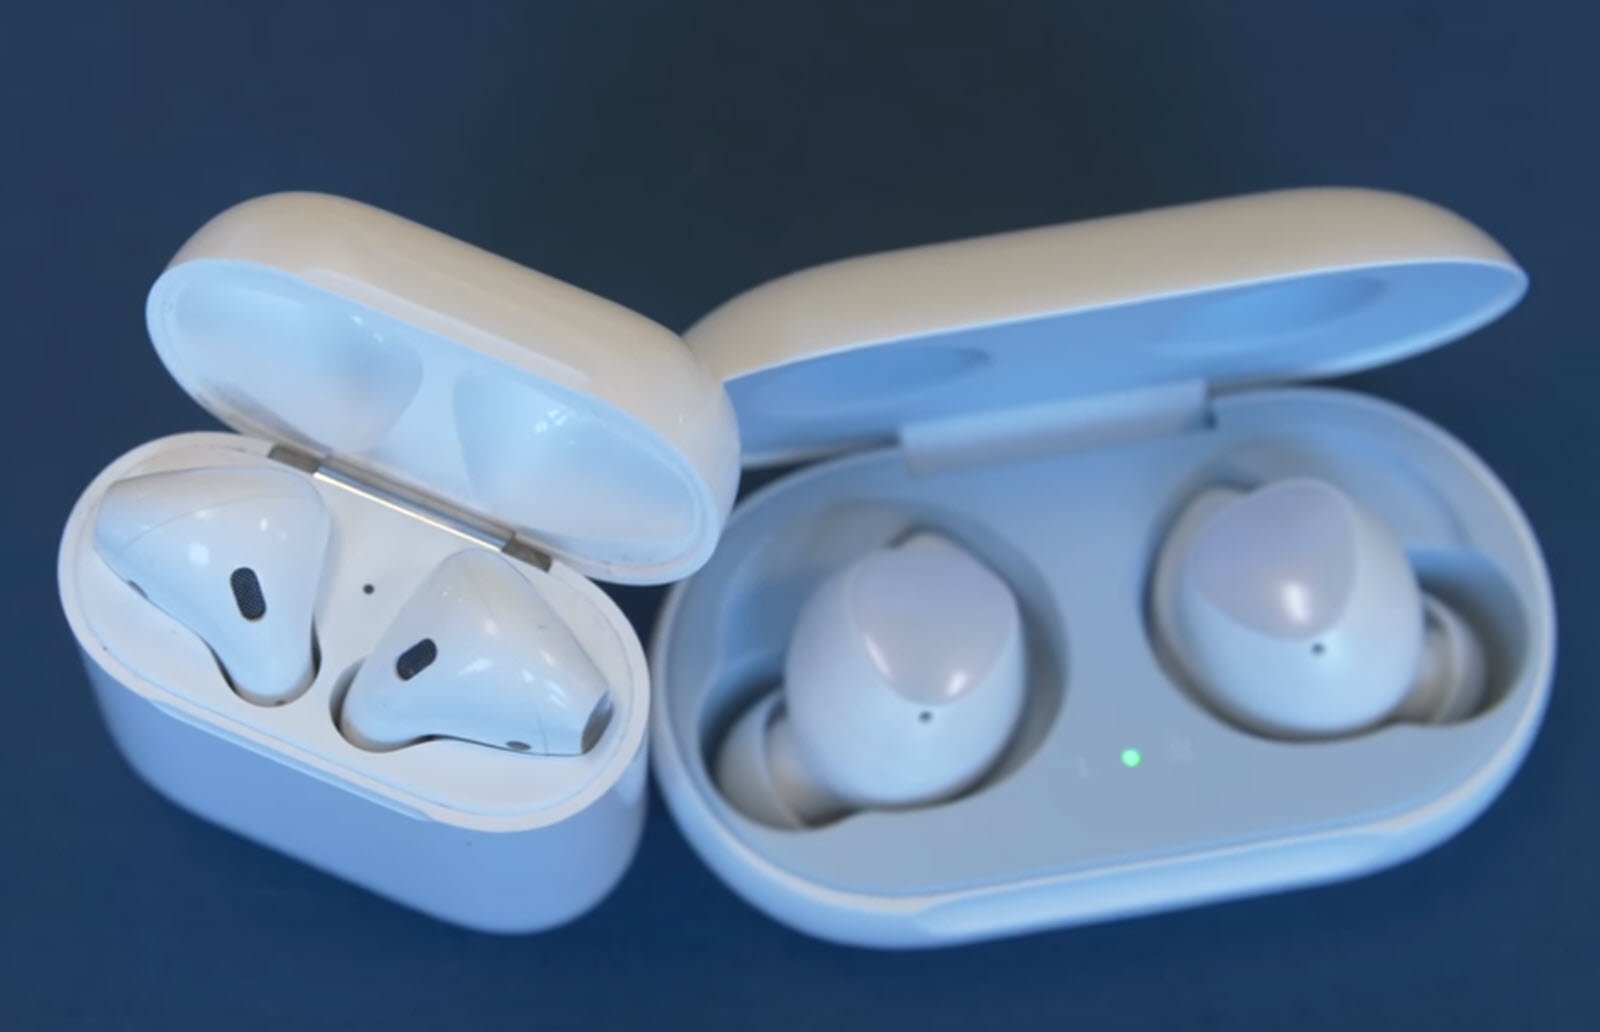 Airpods vs buds